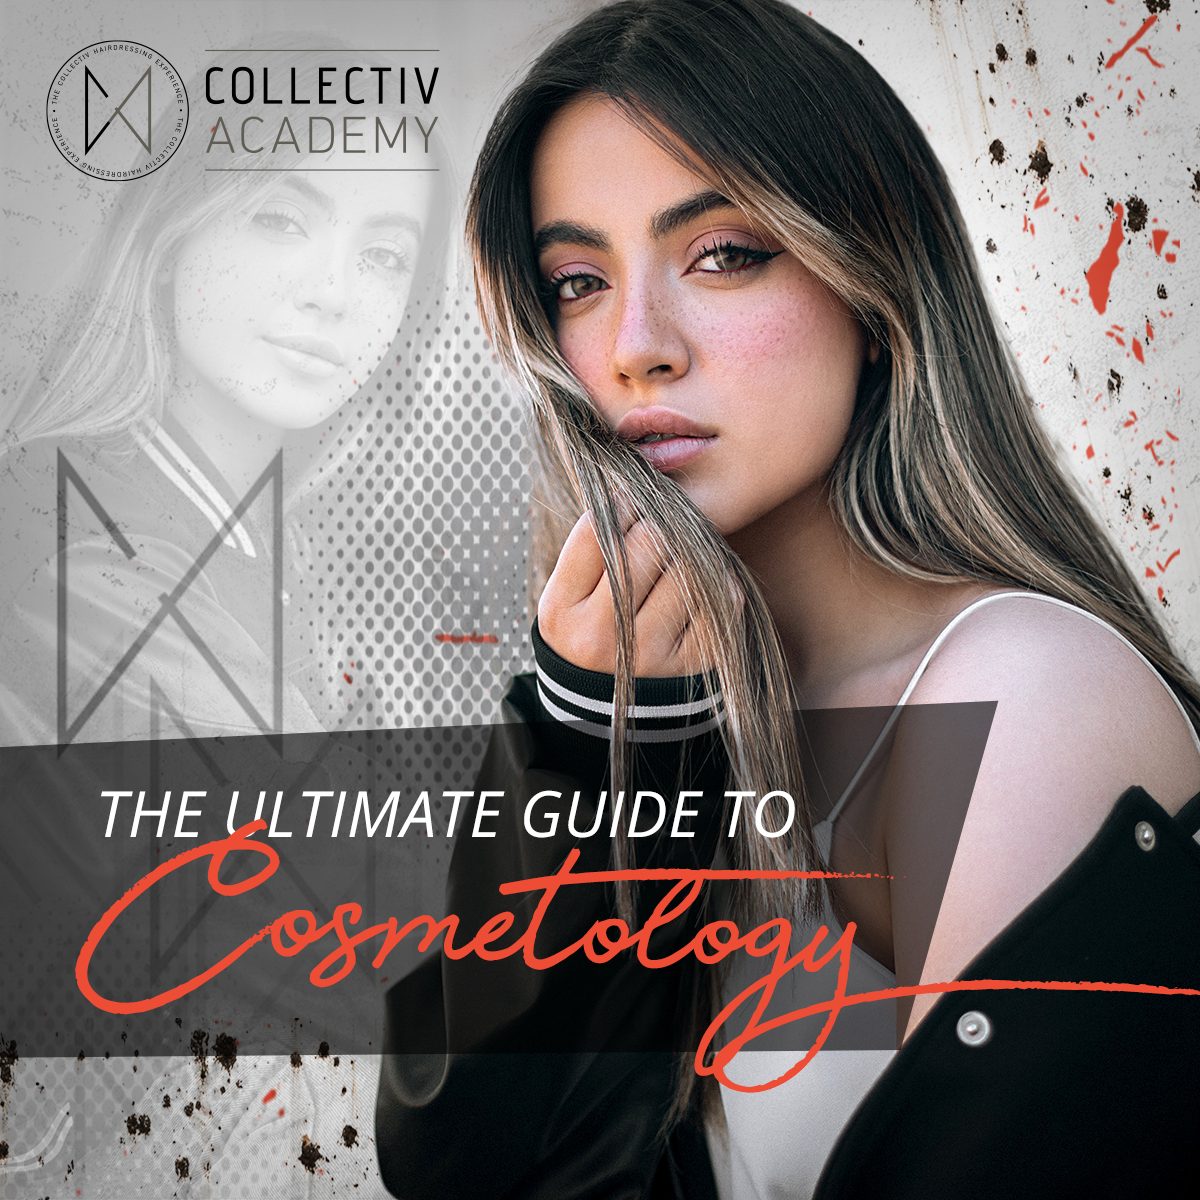 the ultimate guide to cosmetology